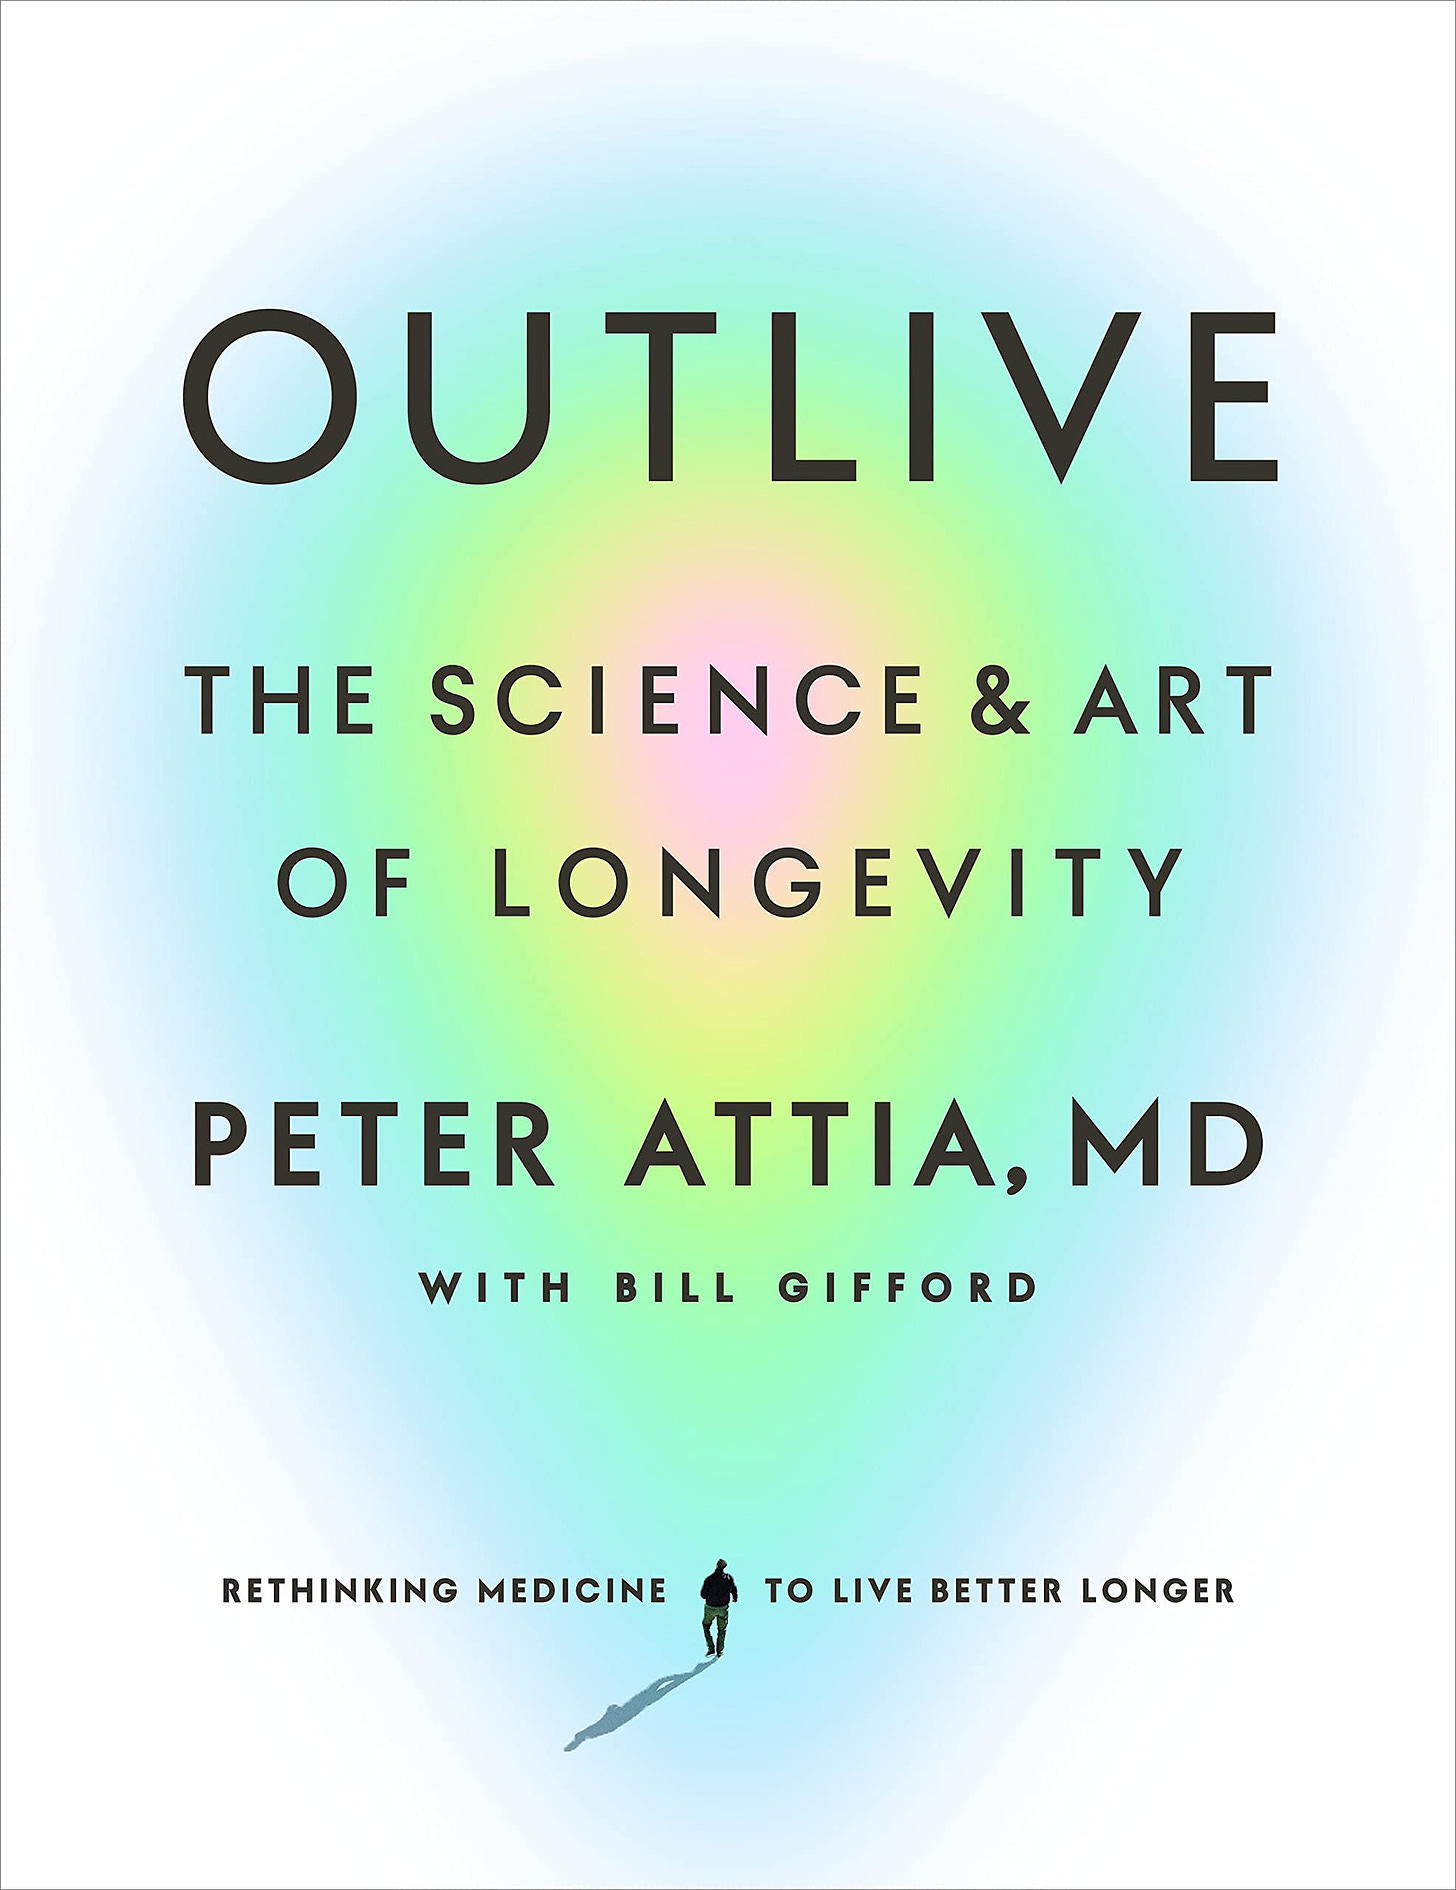 Outlive: The Science and Art of Longevity : Attia MD, Peter, Gifford, Bill:  Amazon.es: Libros